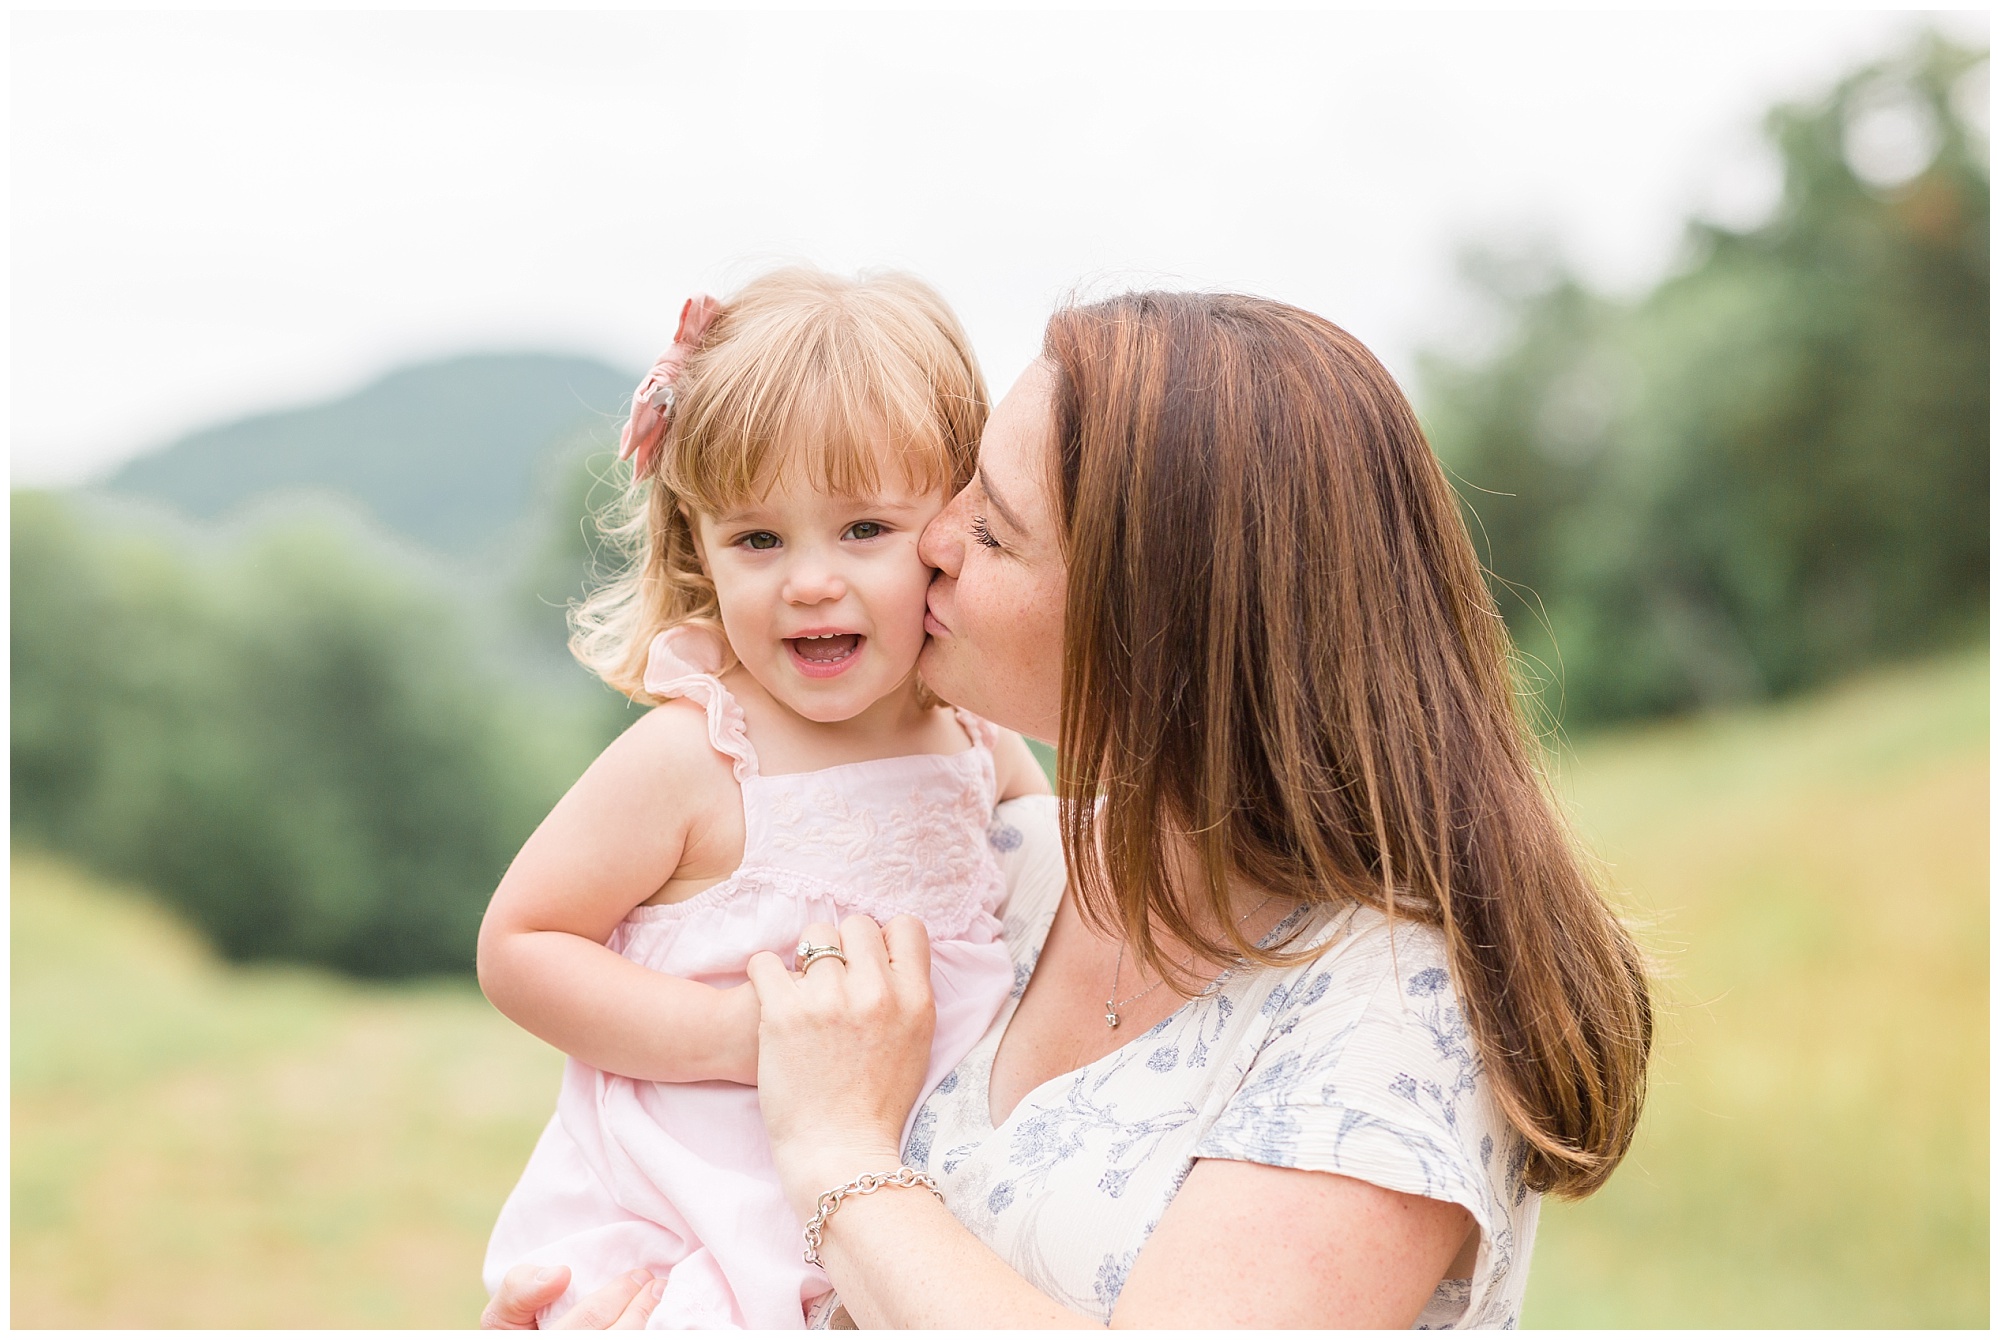 Mom is holding daughter and kissing her cheek. Daughter is wearing a soft pink sleeveless dress with matching hair bow. Mom is wearing short sleeve white dress with blue floral print.